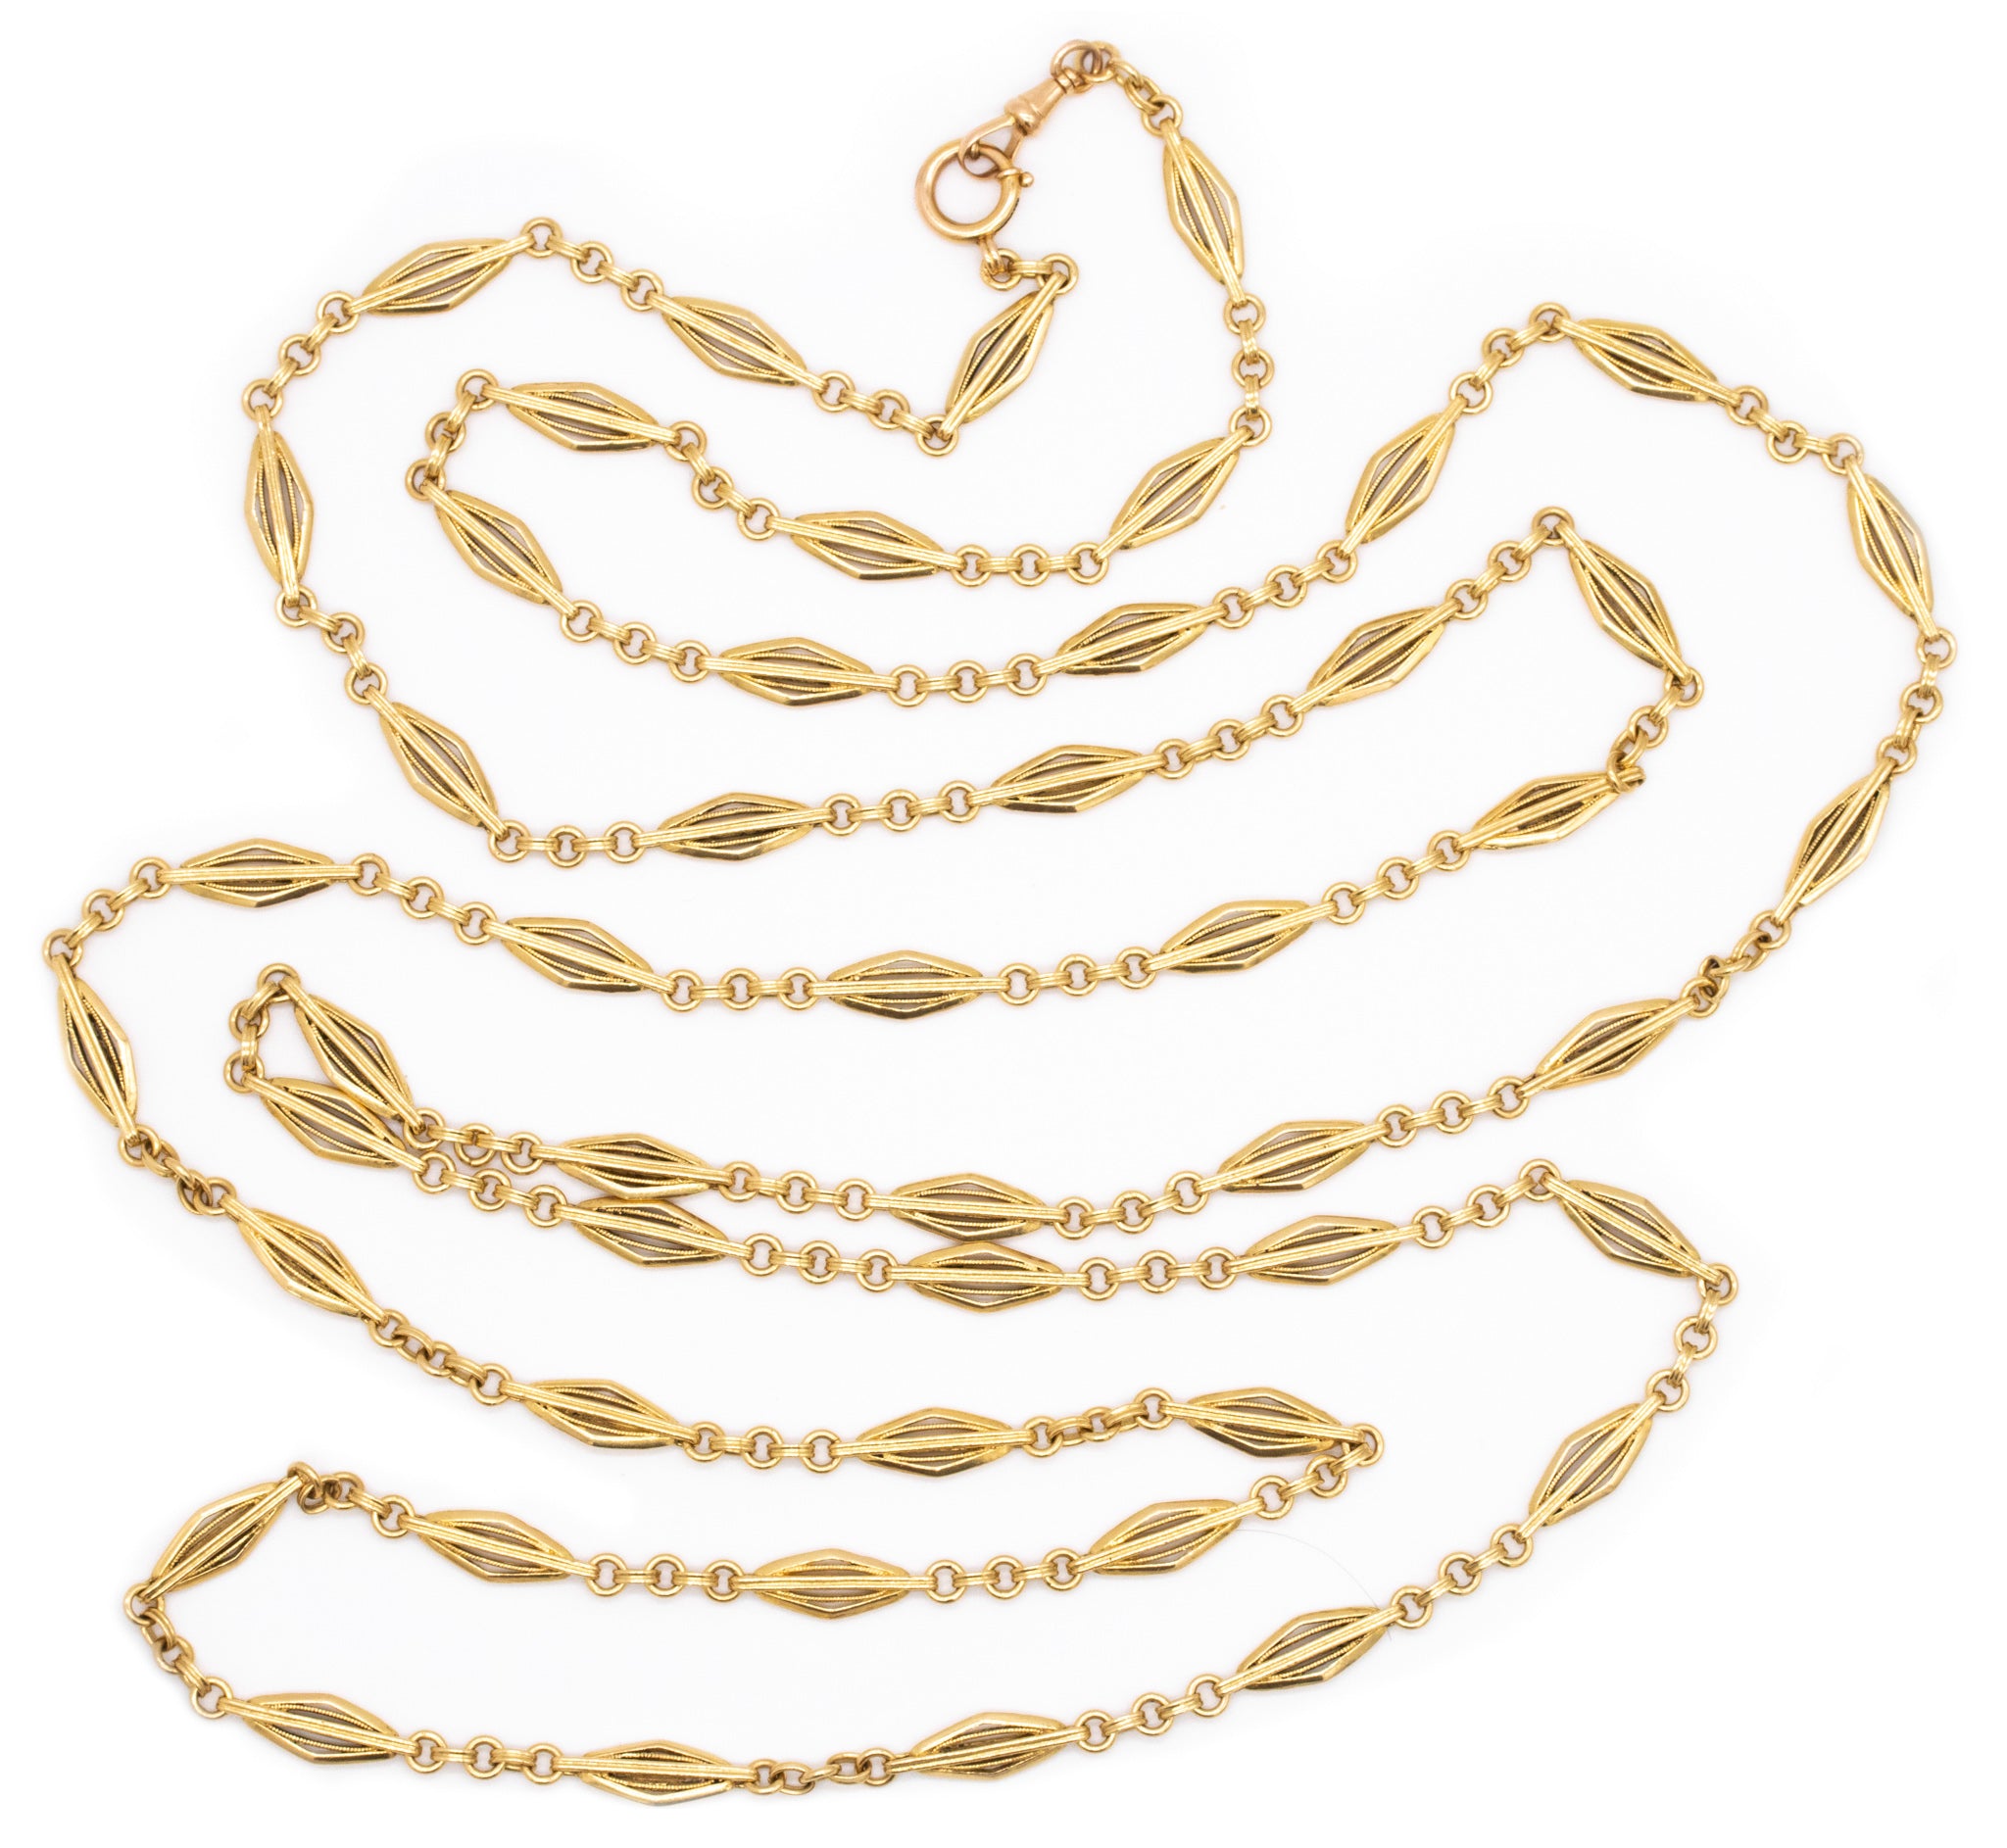 FRENCH ART DECO 1920 LONG SAUTOIR NECKLACE CHAIN IN 18 KT GOLD